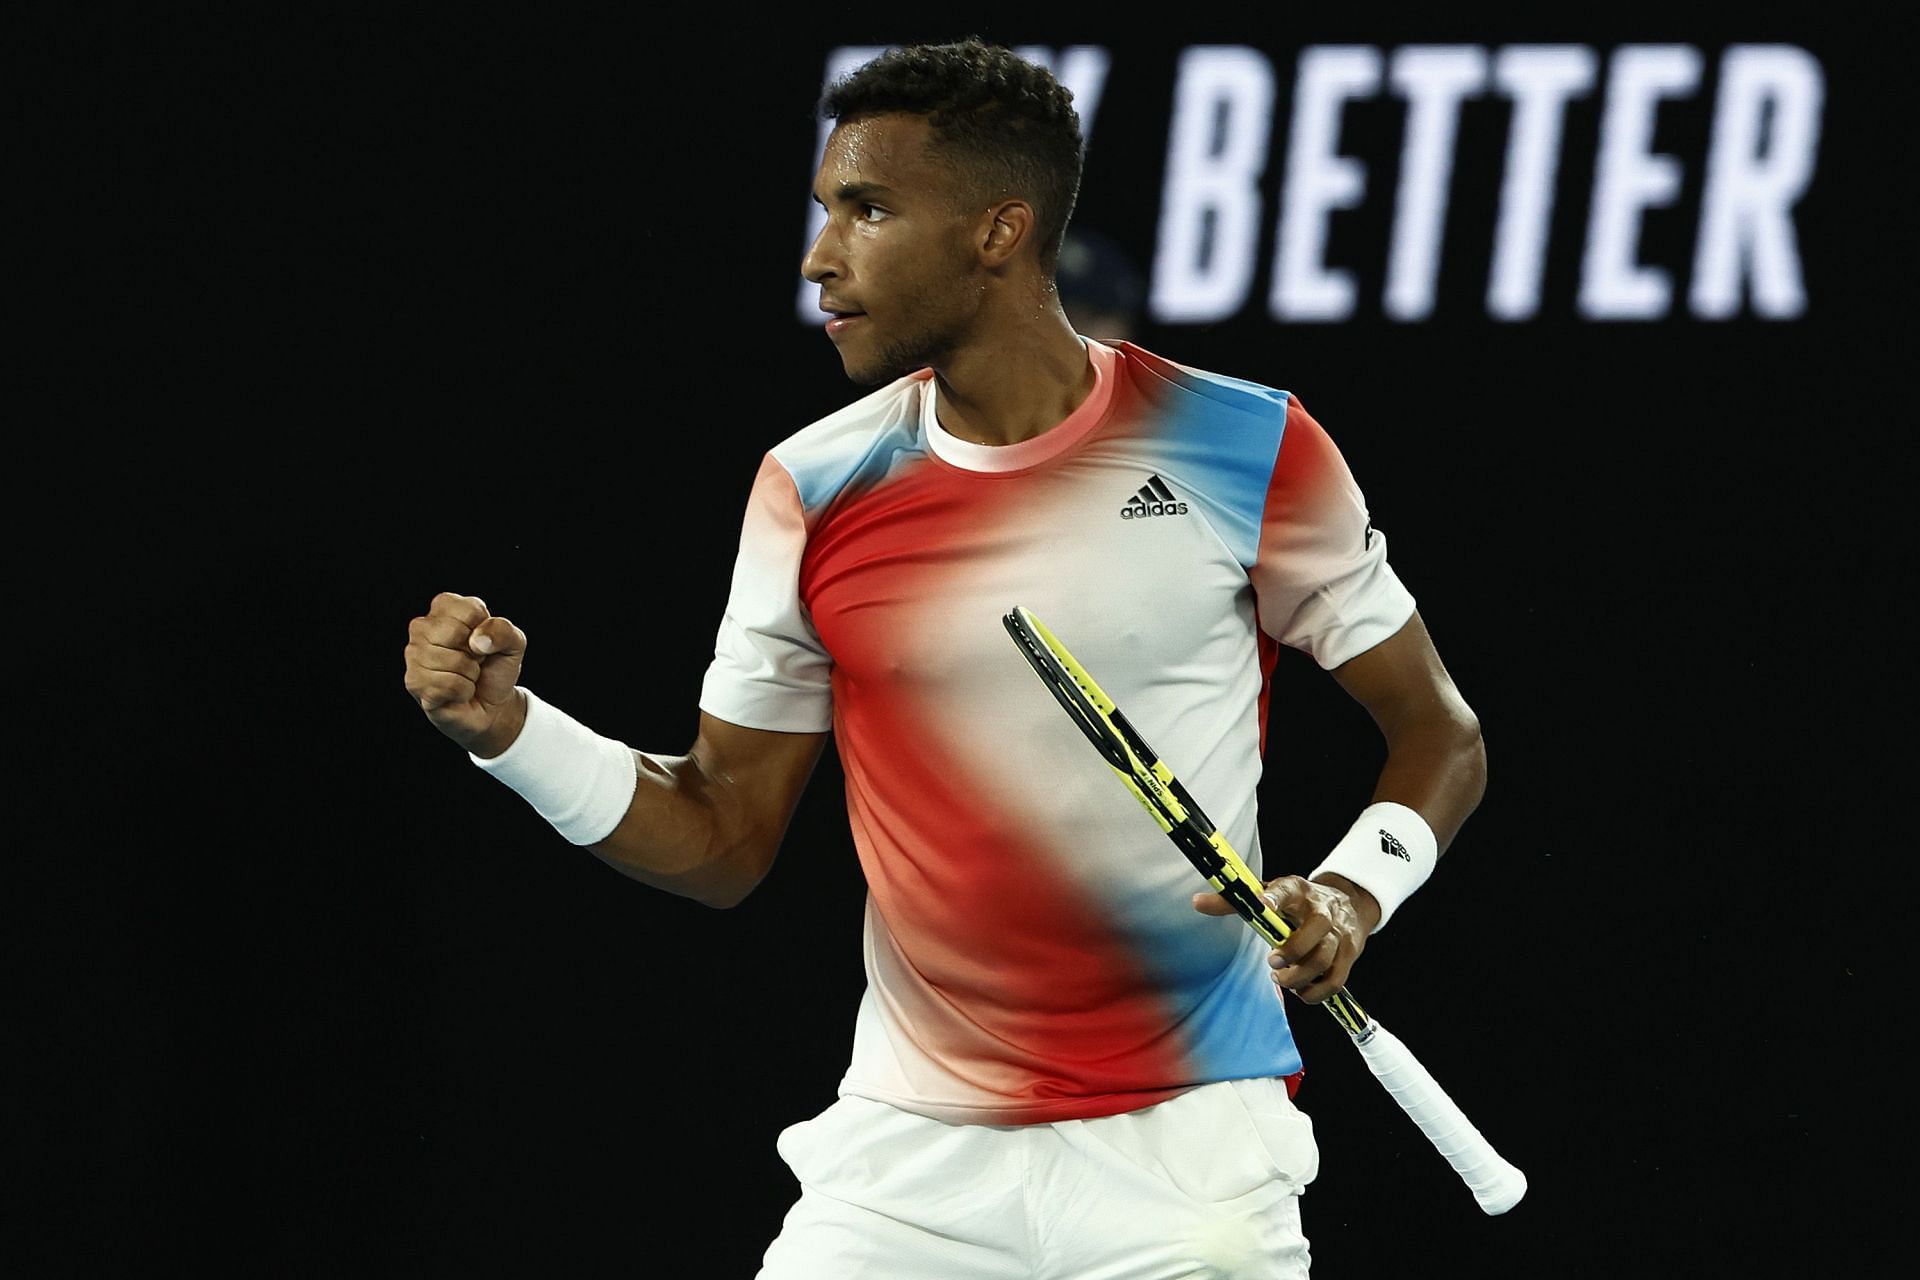 Felix Auger-Aliassime defeated Stefanos Tsitsipas in the final to lift his first ATP tour title